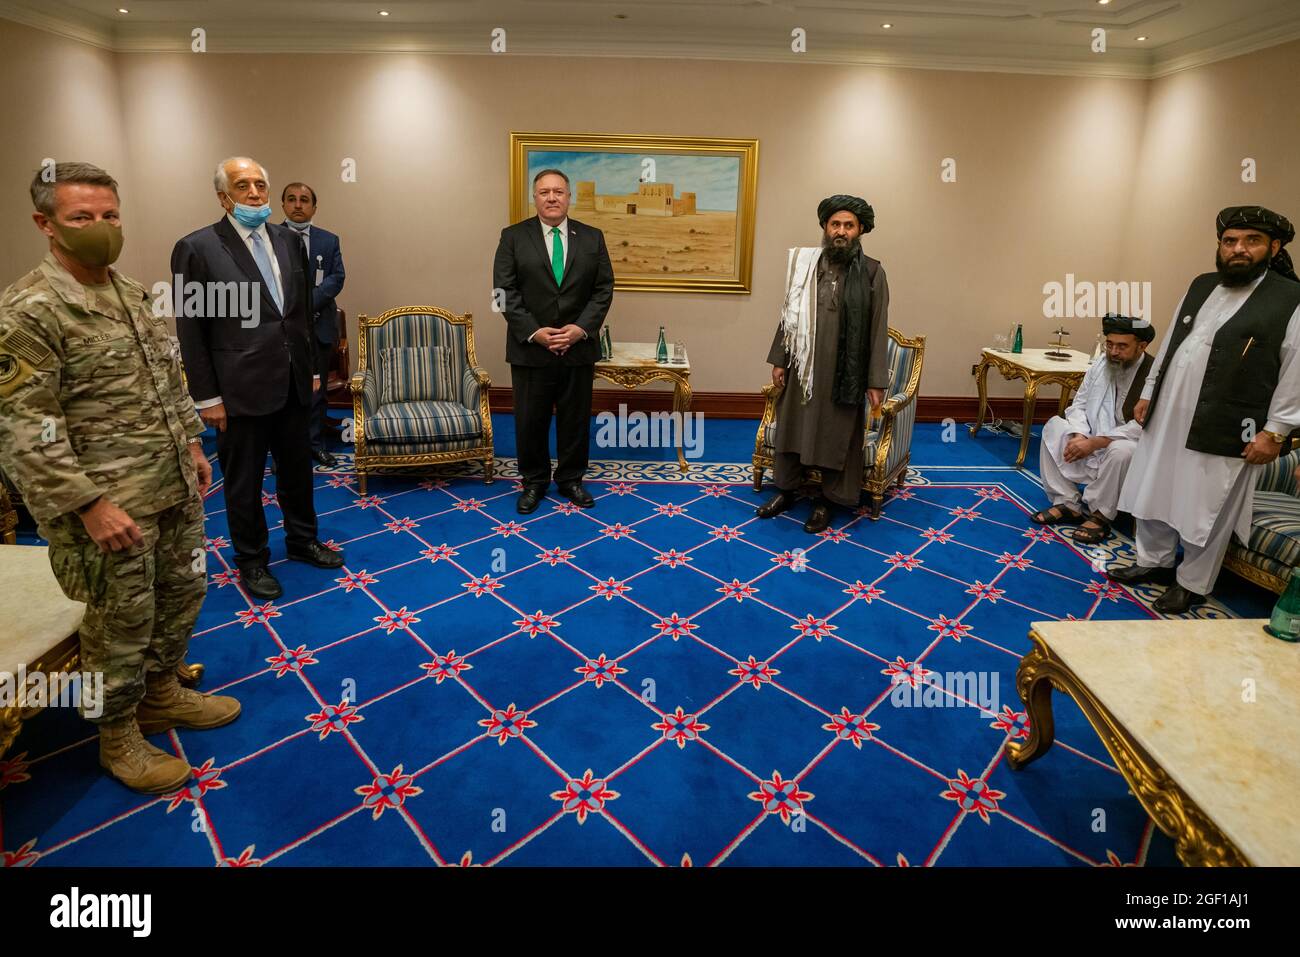 Secretary Pompeo Meets With the Taliban Delegation U.S. Secretary of State Michael R. Pompeo meets with the Taliban Delegation in Doha, Qatar, on September 12, 2020. Stock Photo